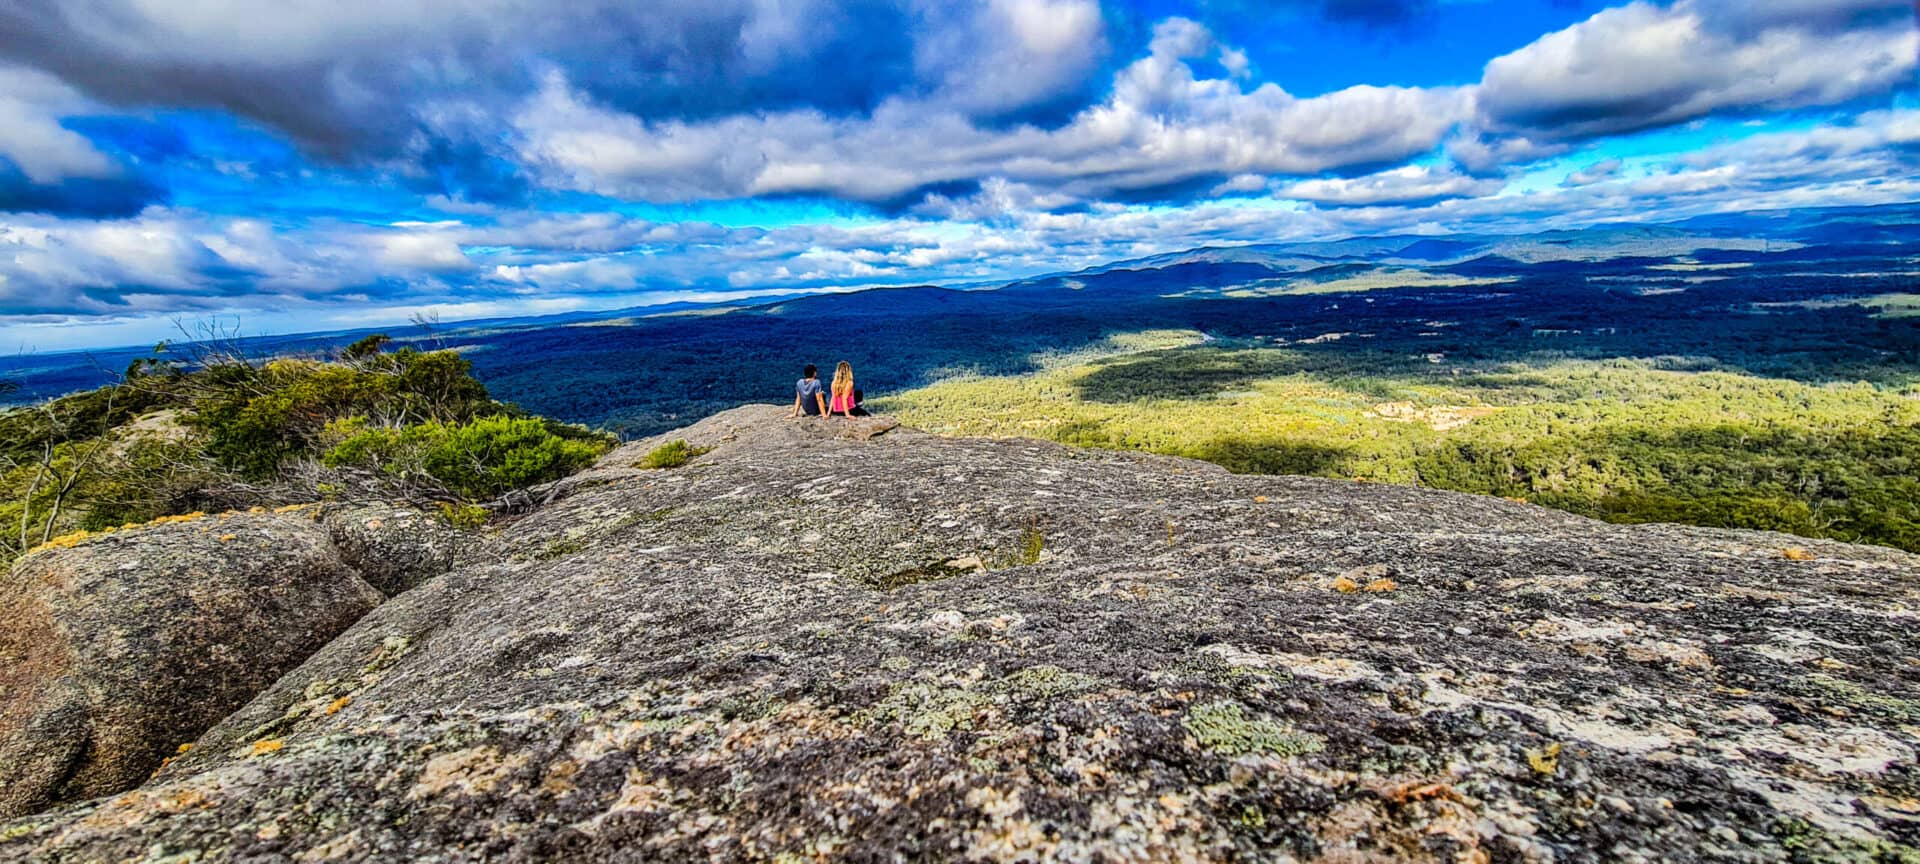 Most beautiful places-The Top of the cube rock trail- Stefan and I looking out to the view